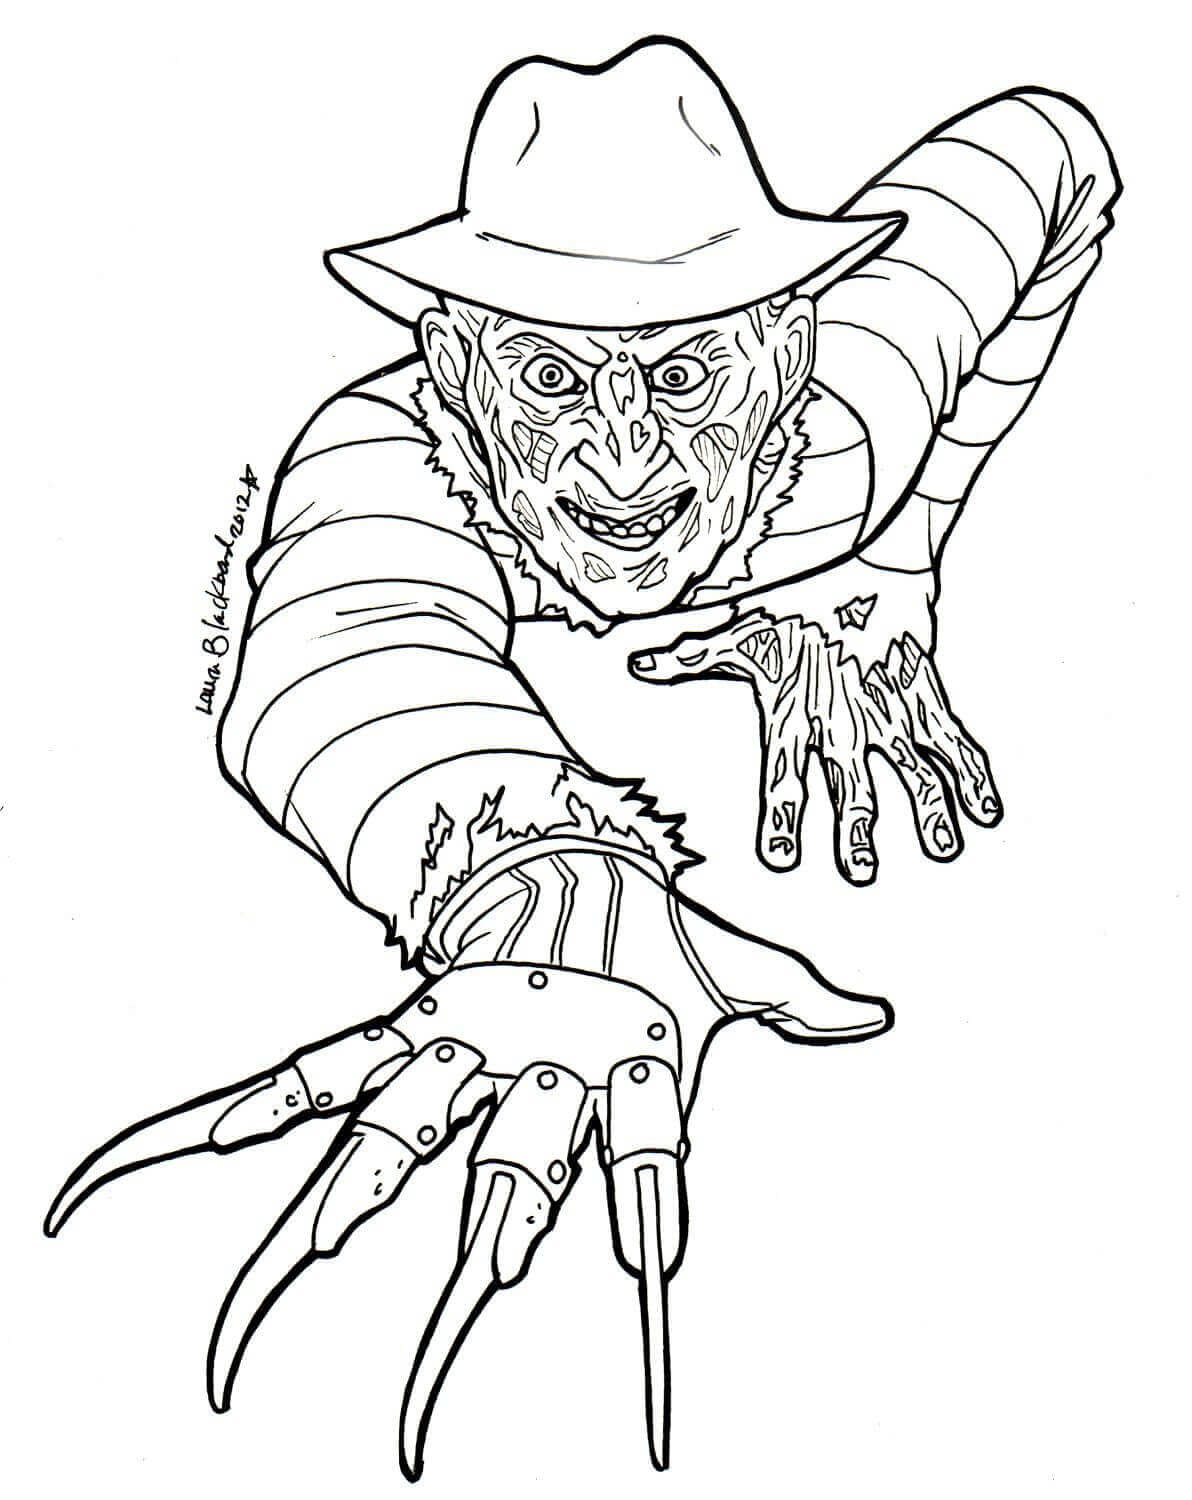 Freddy Krueger Effrayant coloring page